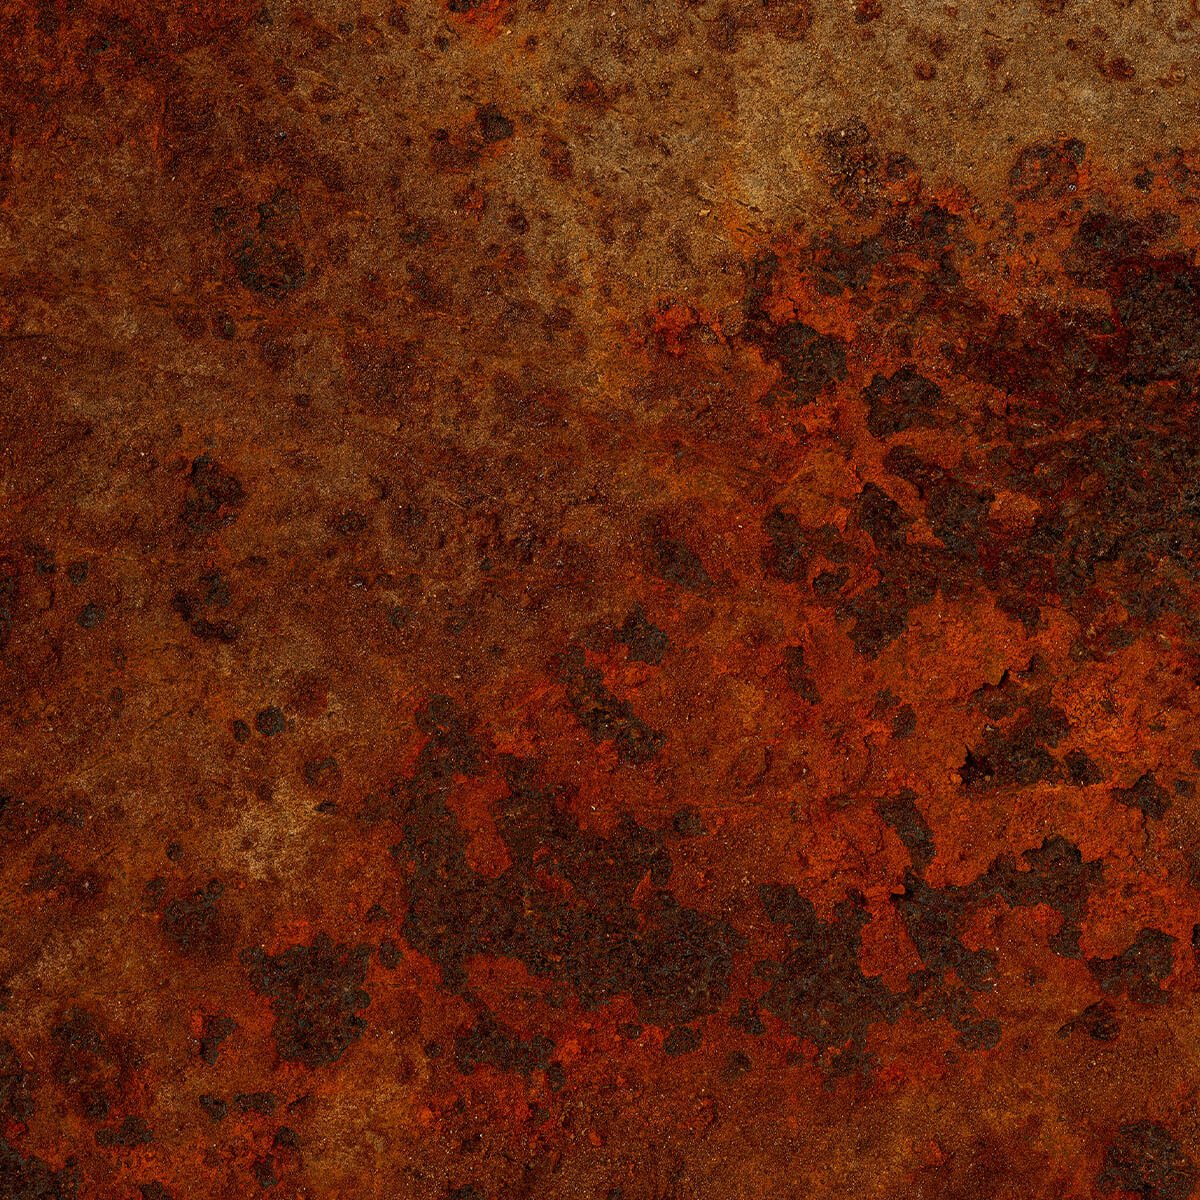 Rust coloured structure